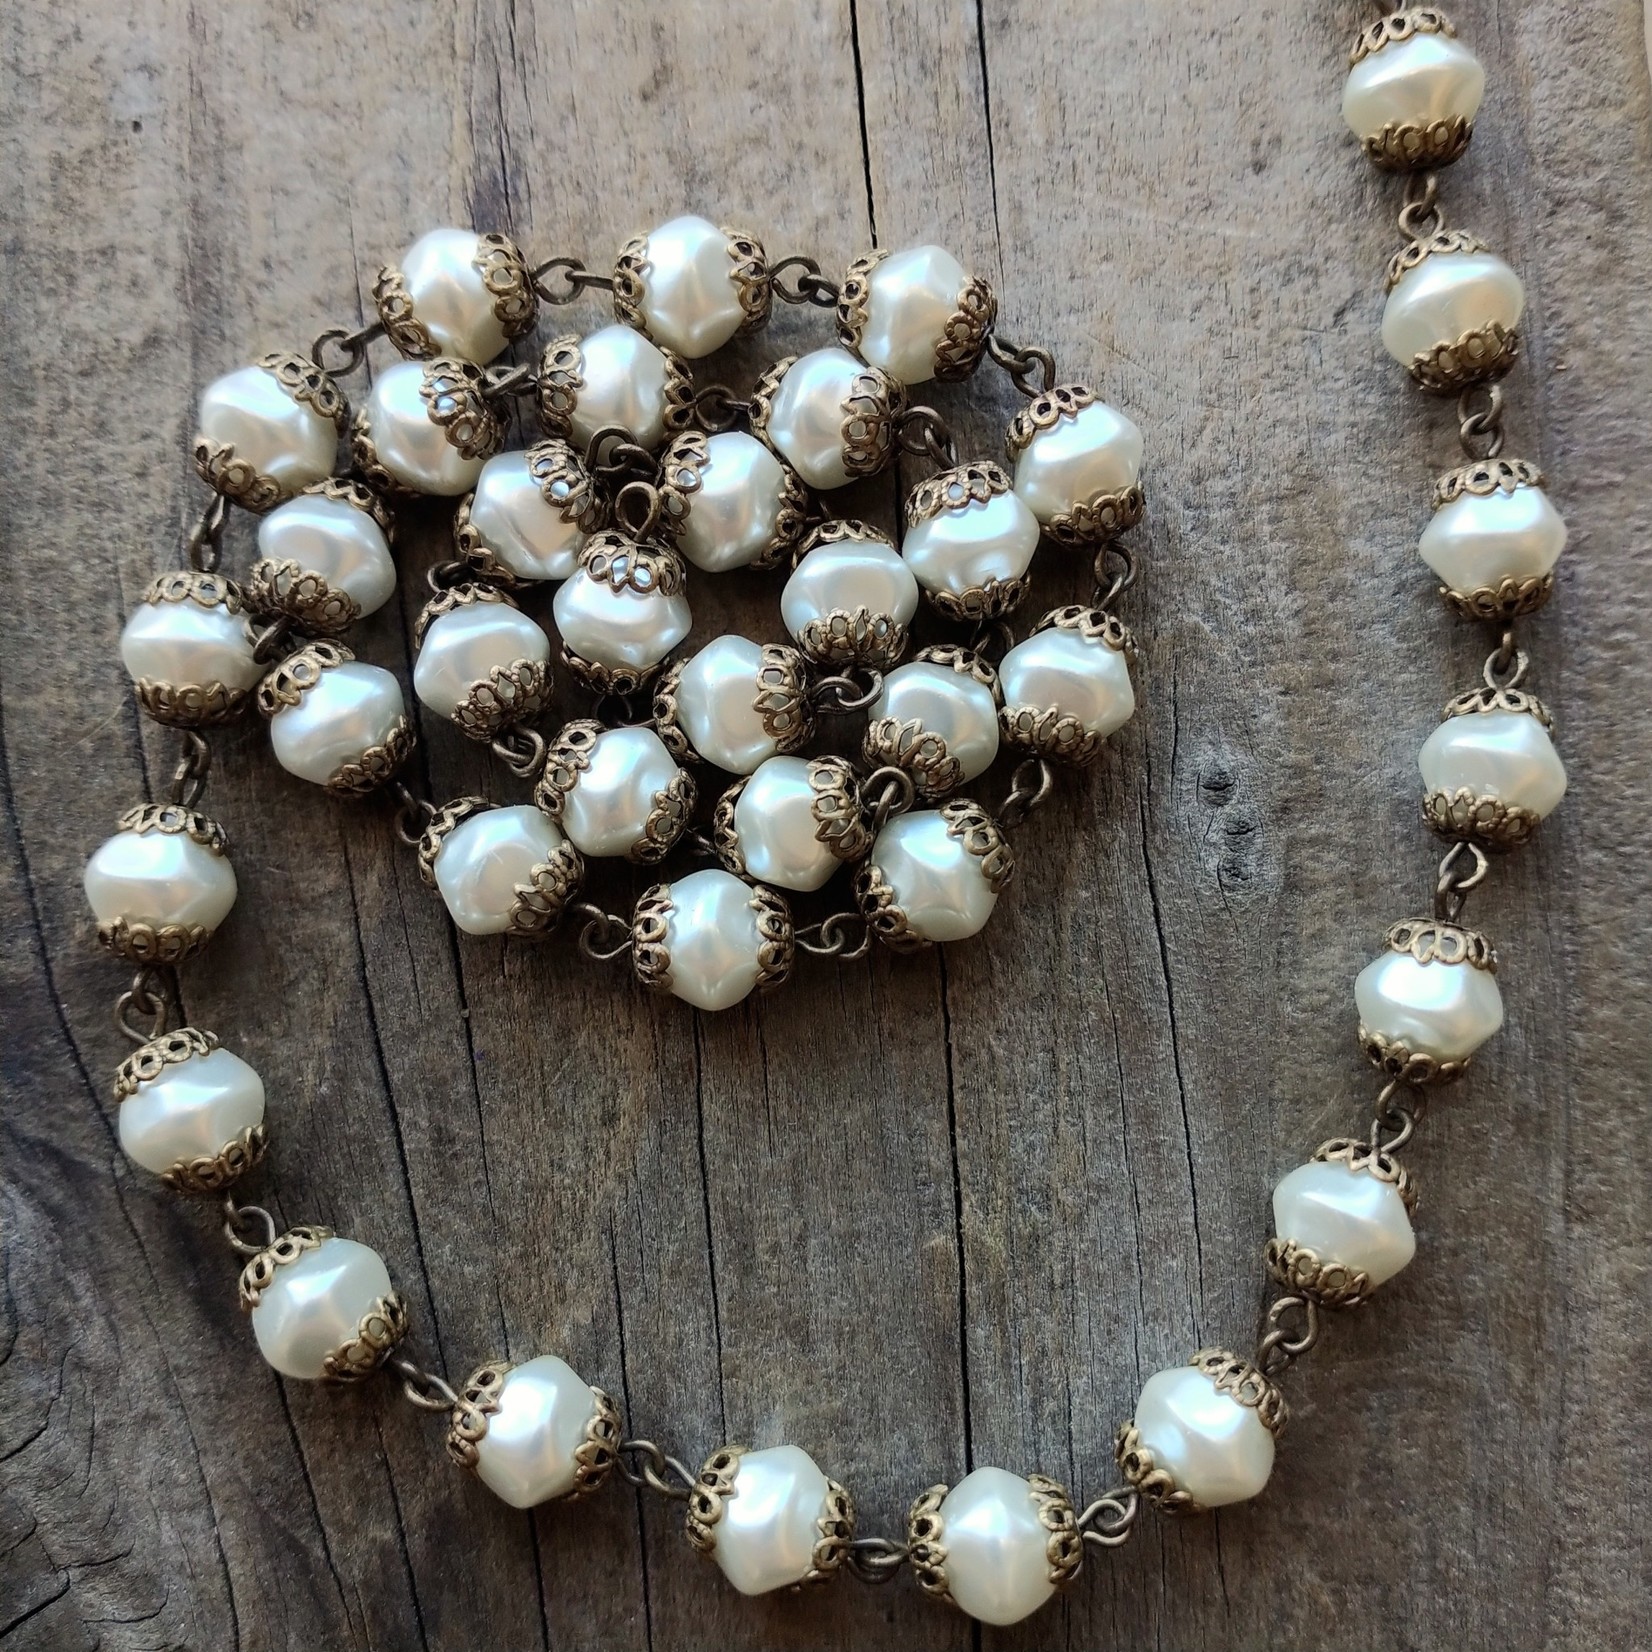 Czech Glass Pearl Chain 8mm White Pearl - 1 foot